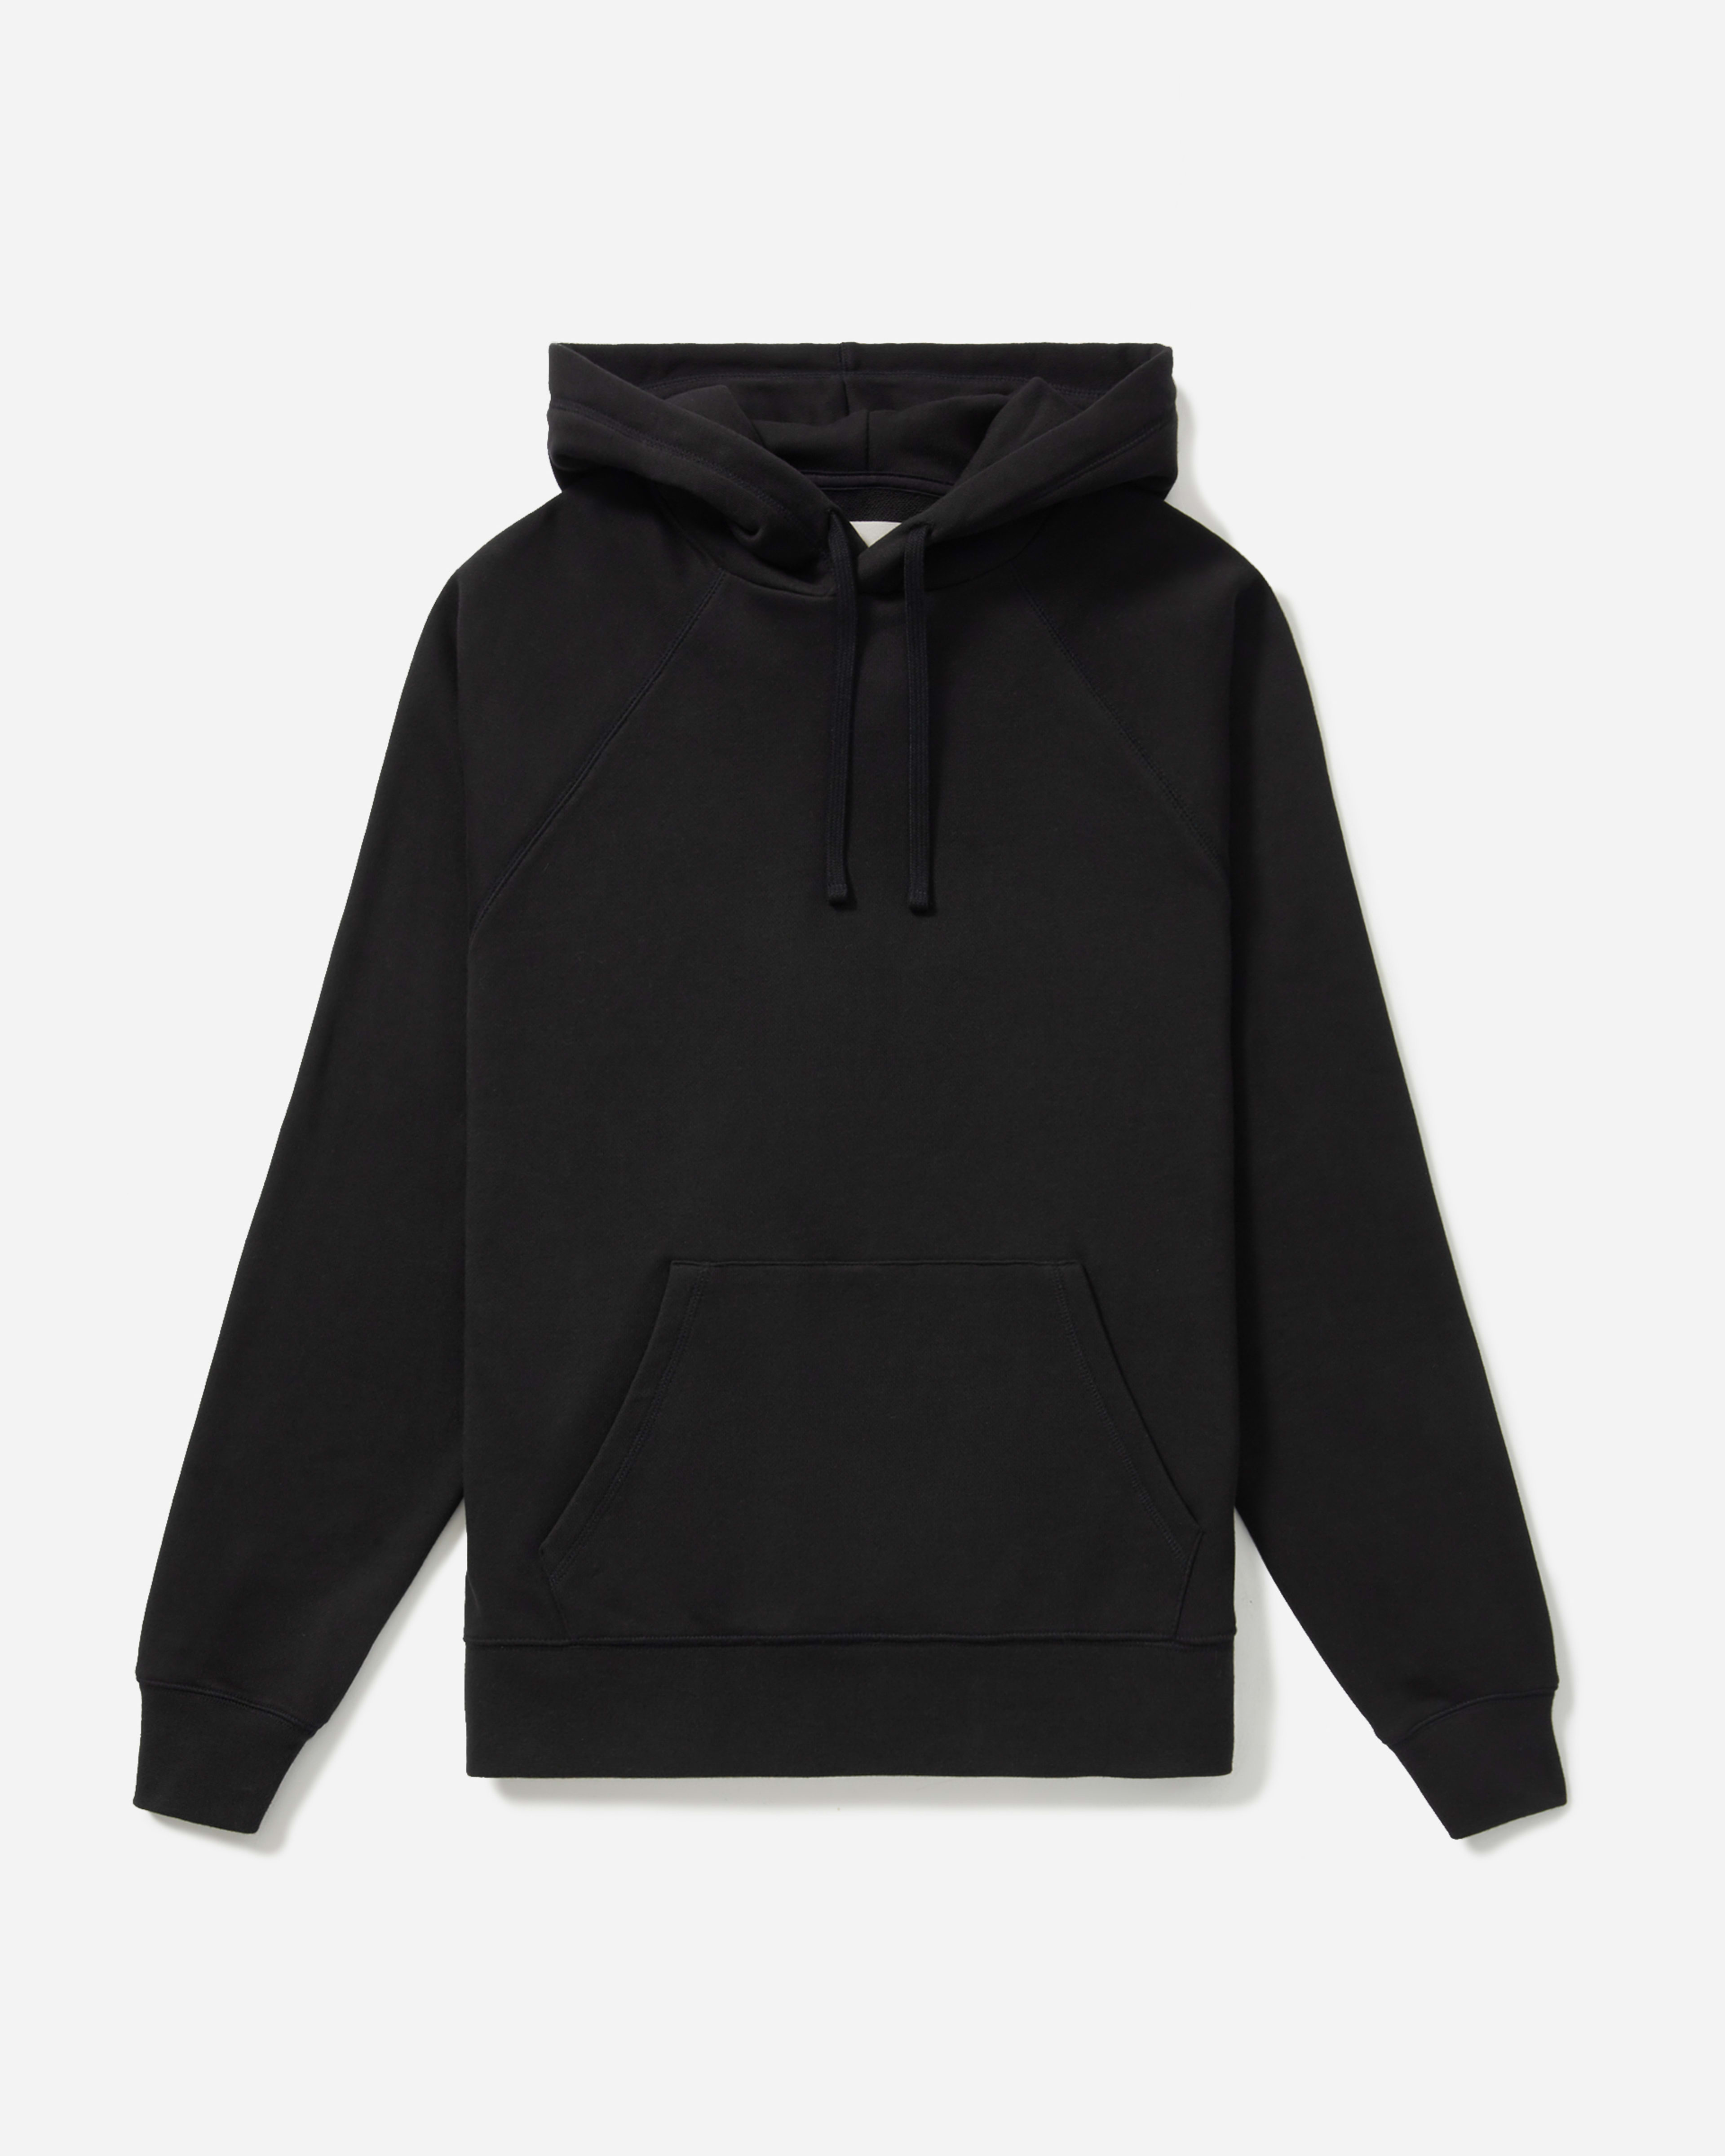 The Lightweight French Terry Hoodie Black – Everlane